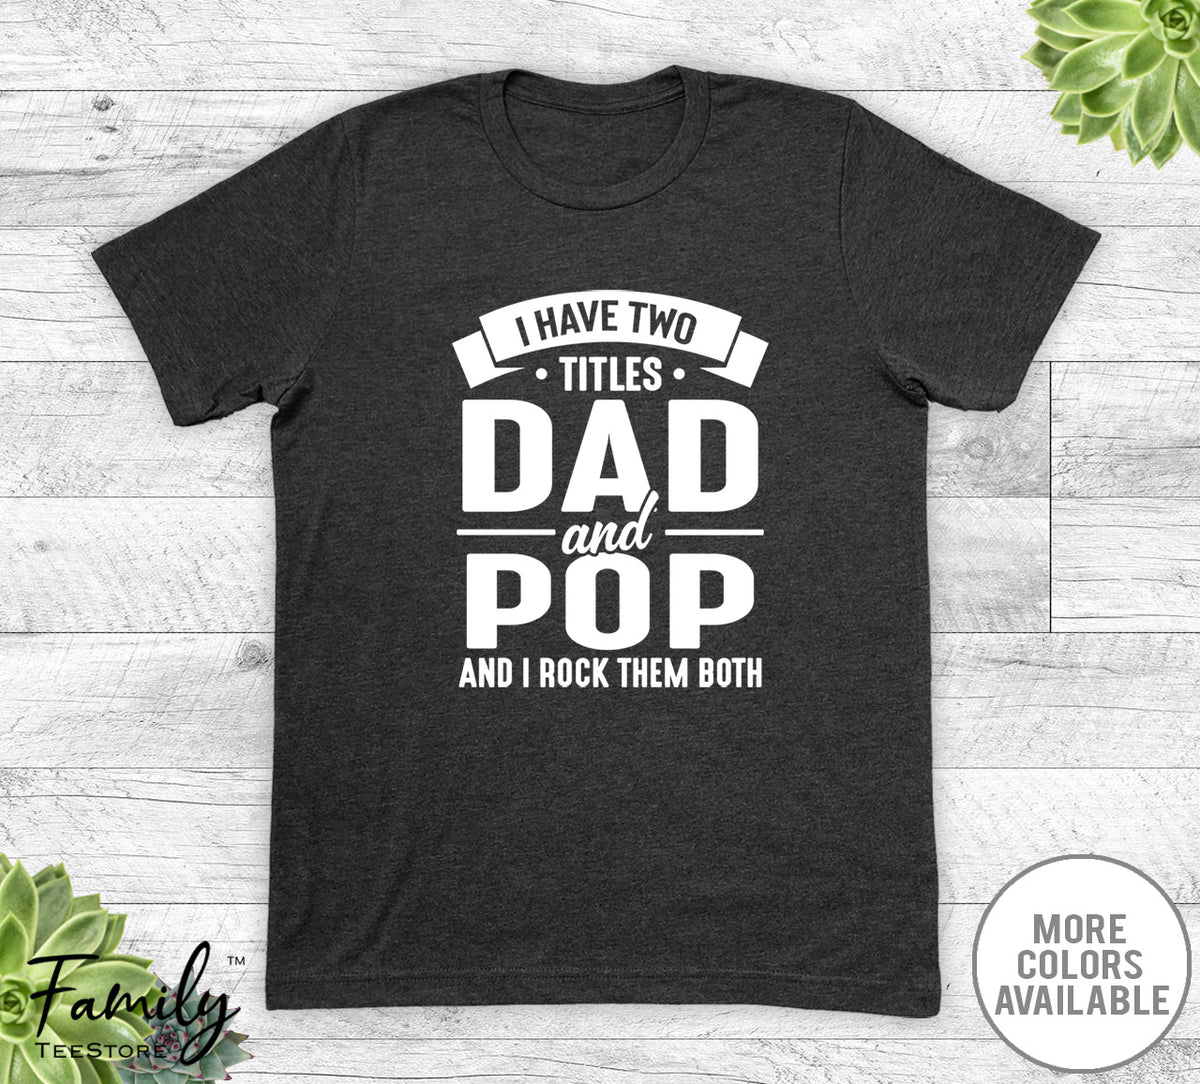 I Have Two Titles Dad And Pop - Unisex T-shirt - Pop Shirt - Funny Pop Gift - familyteeprints